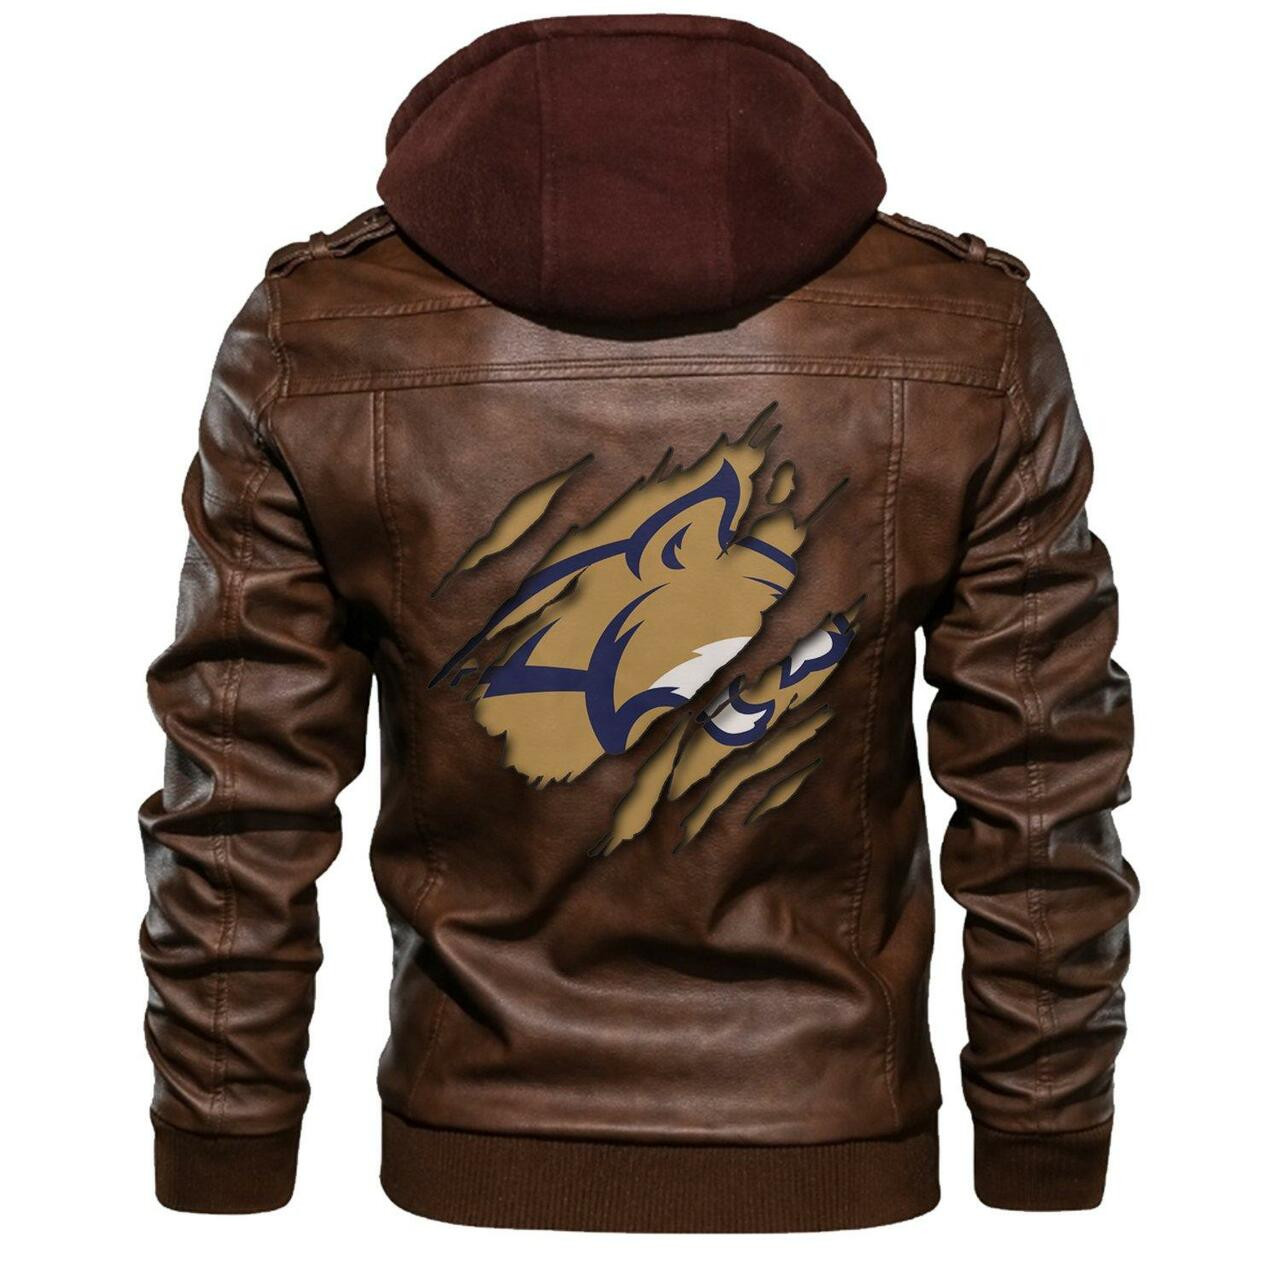 Are you looking for a great leather jacket? 136